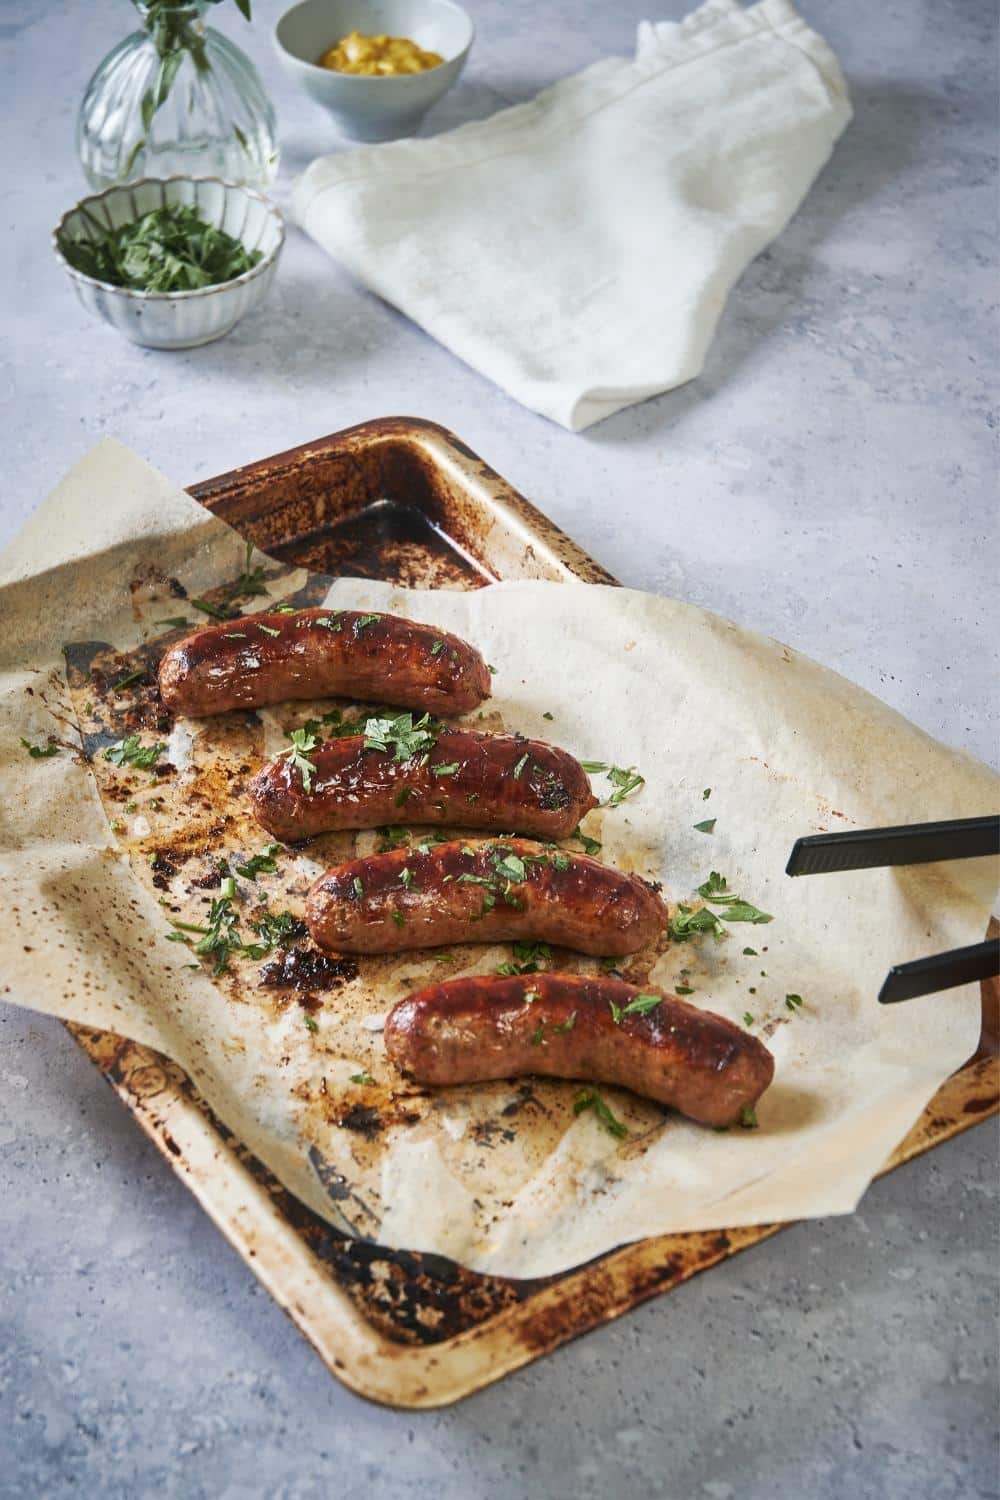 Four roasted brats garnished with parsley on a sheet pan lined with parchment paper. A pair of black tongs is on the corner of the pan.